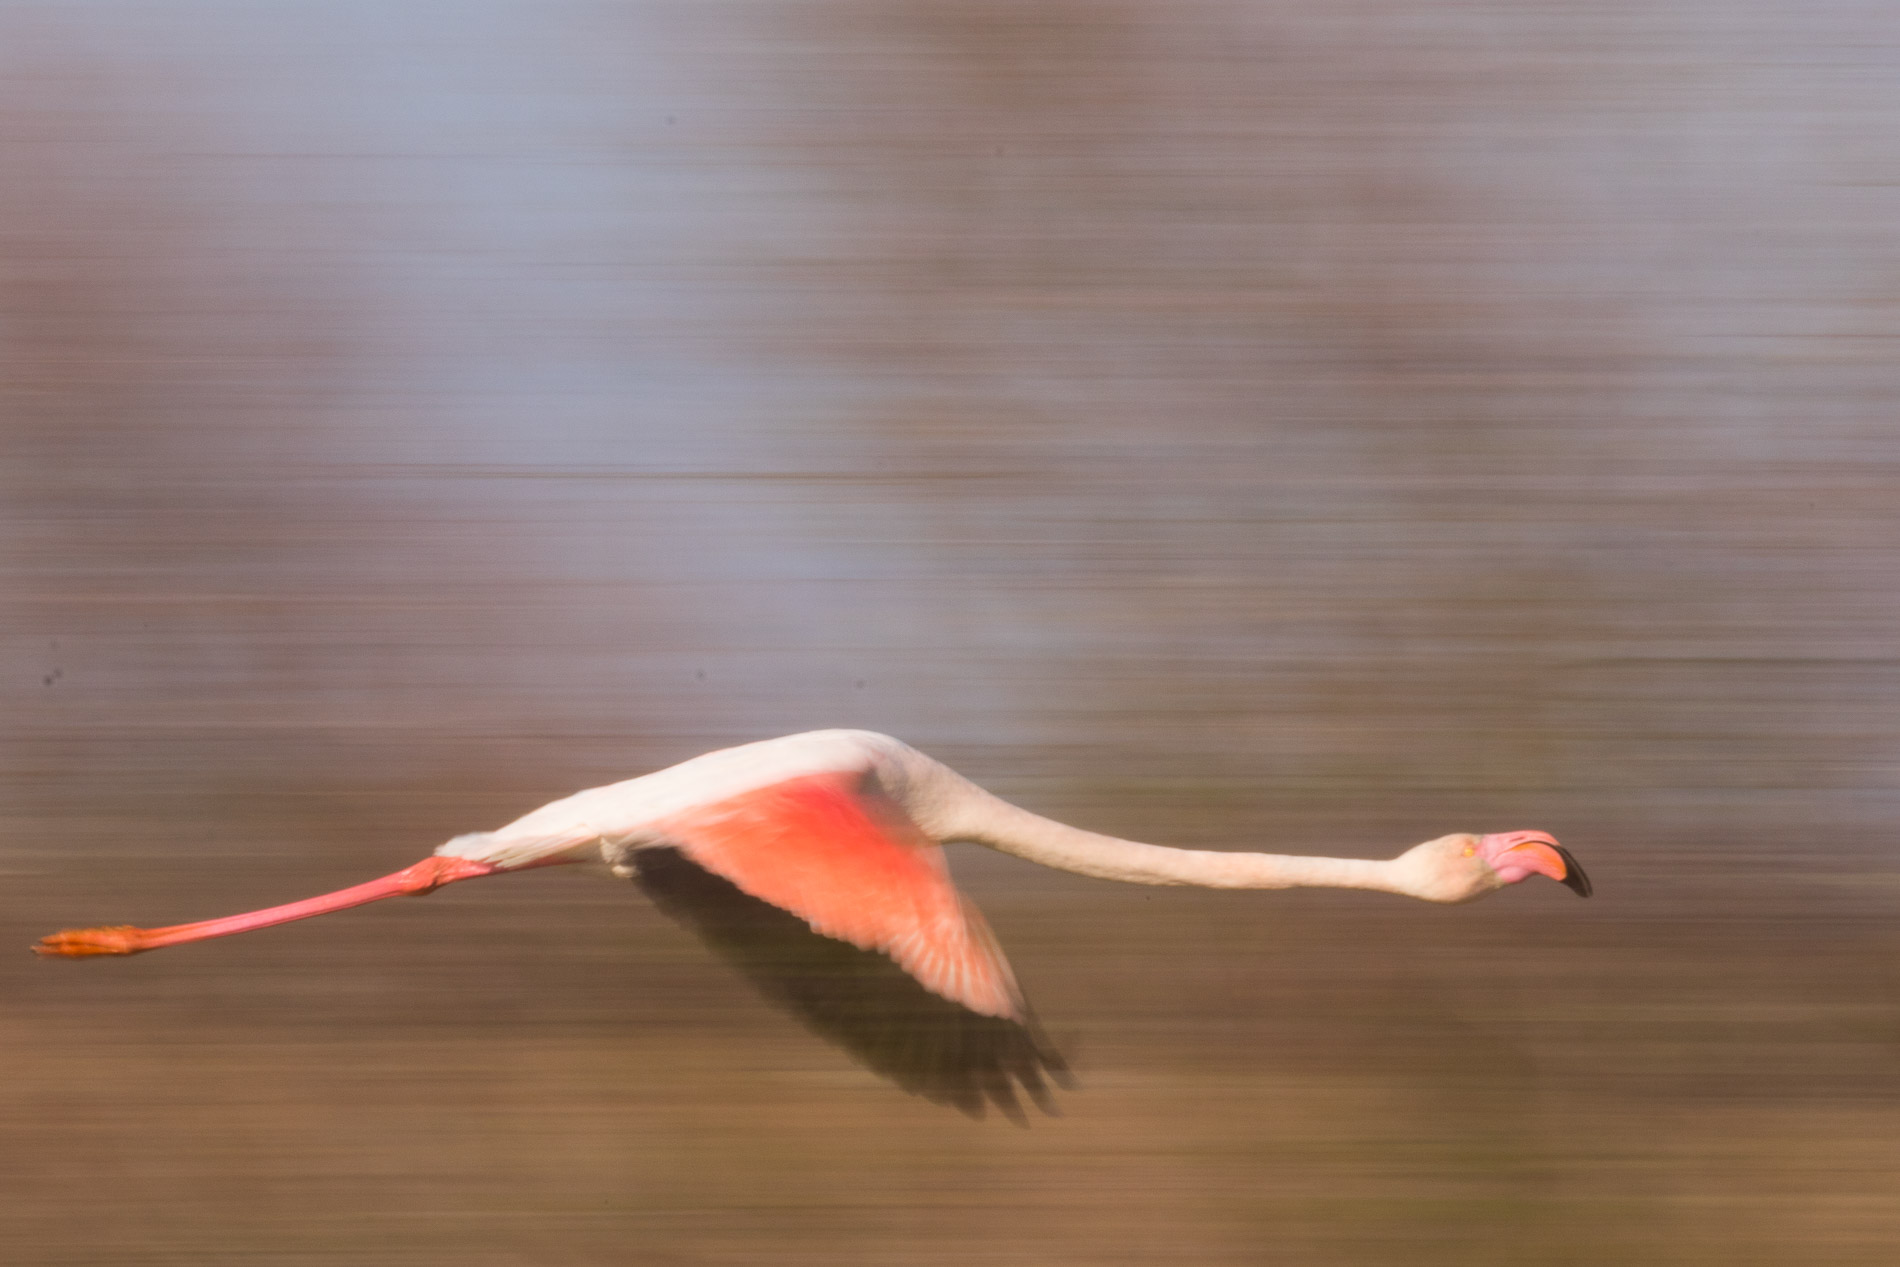 Photograph of a flamingo flying